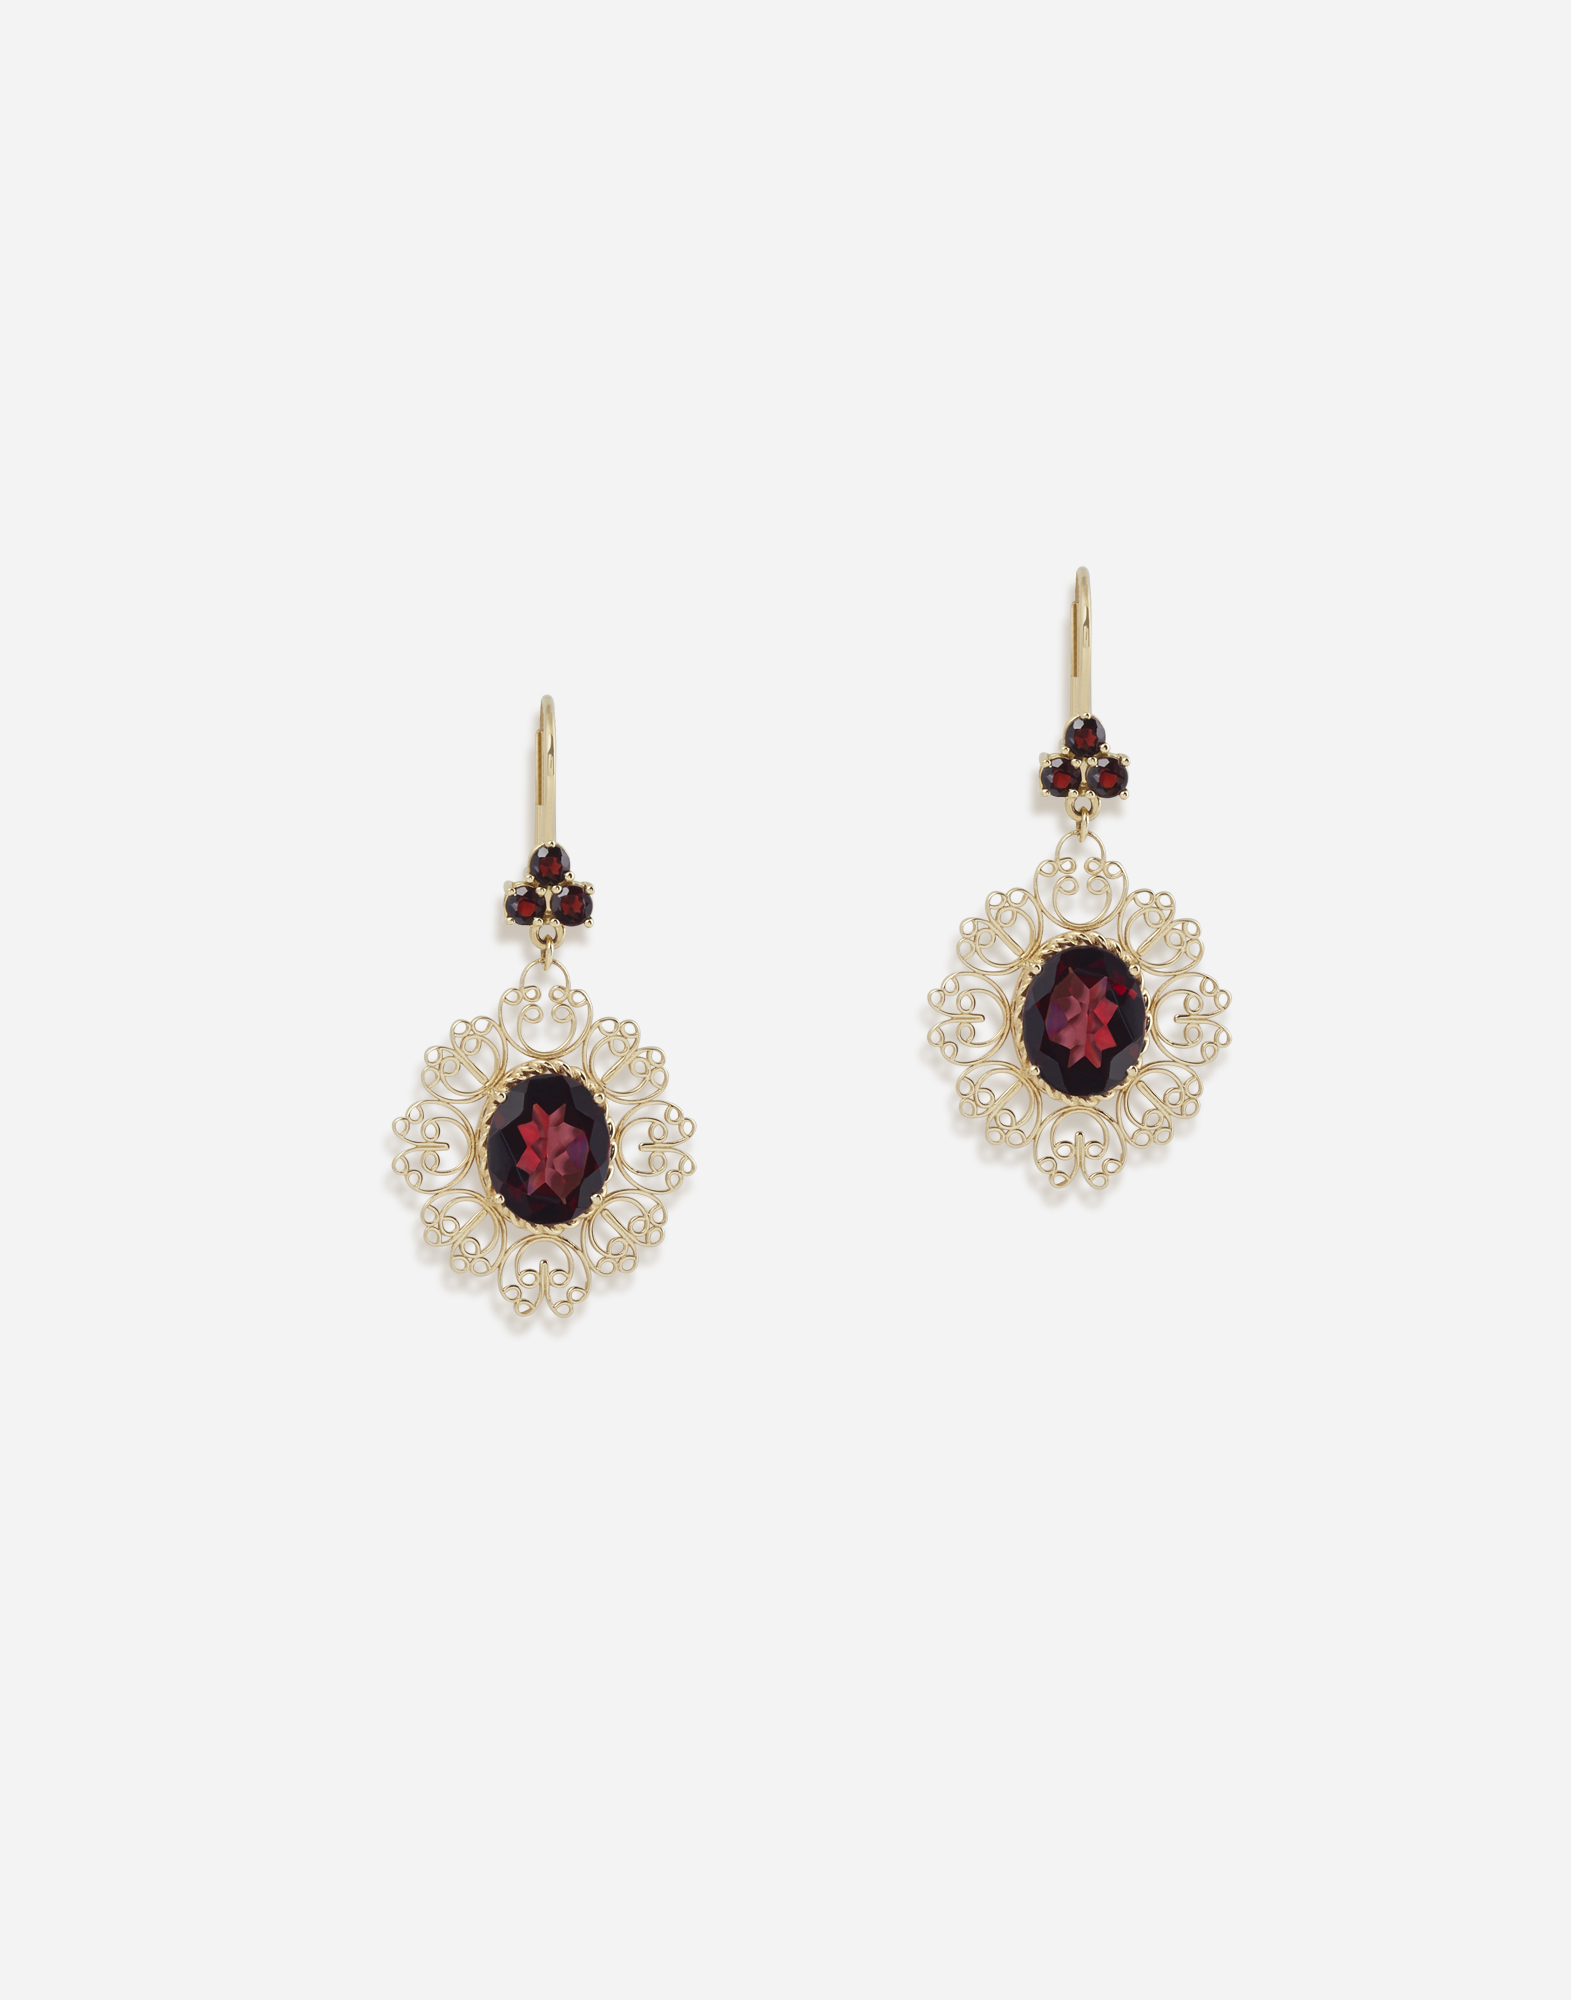 Barocco earrings in yellow gold with rhodolite garnets in Gold